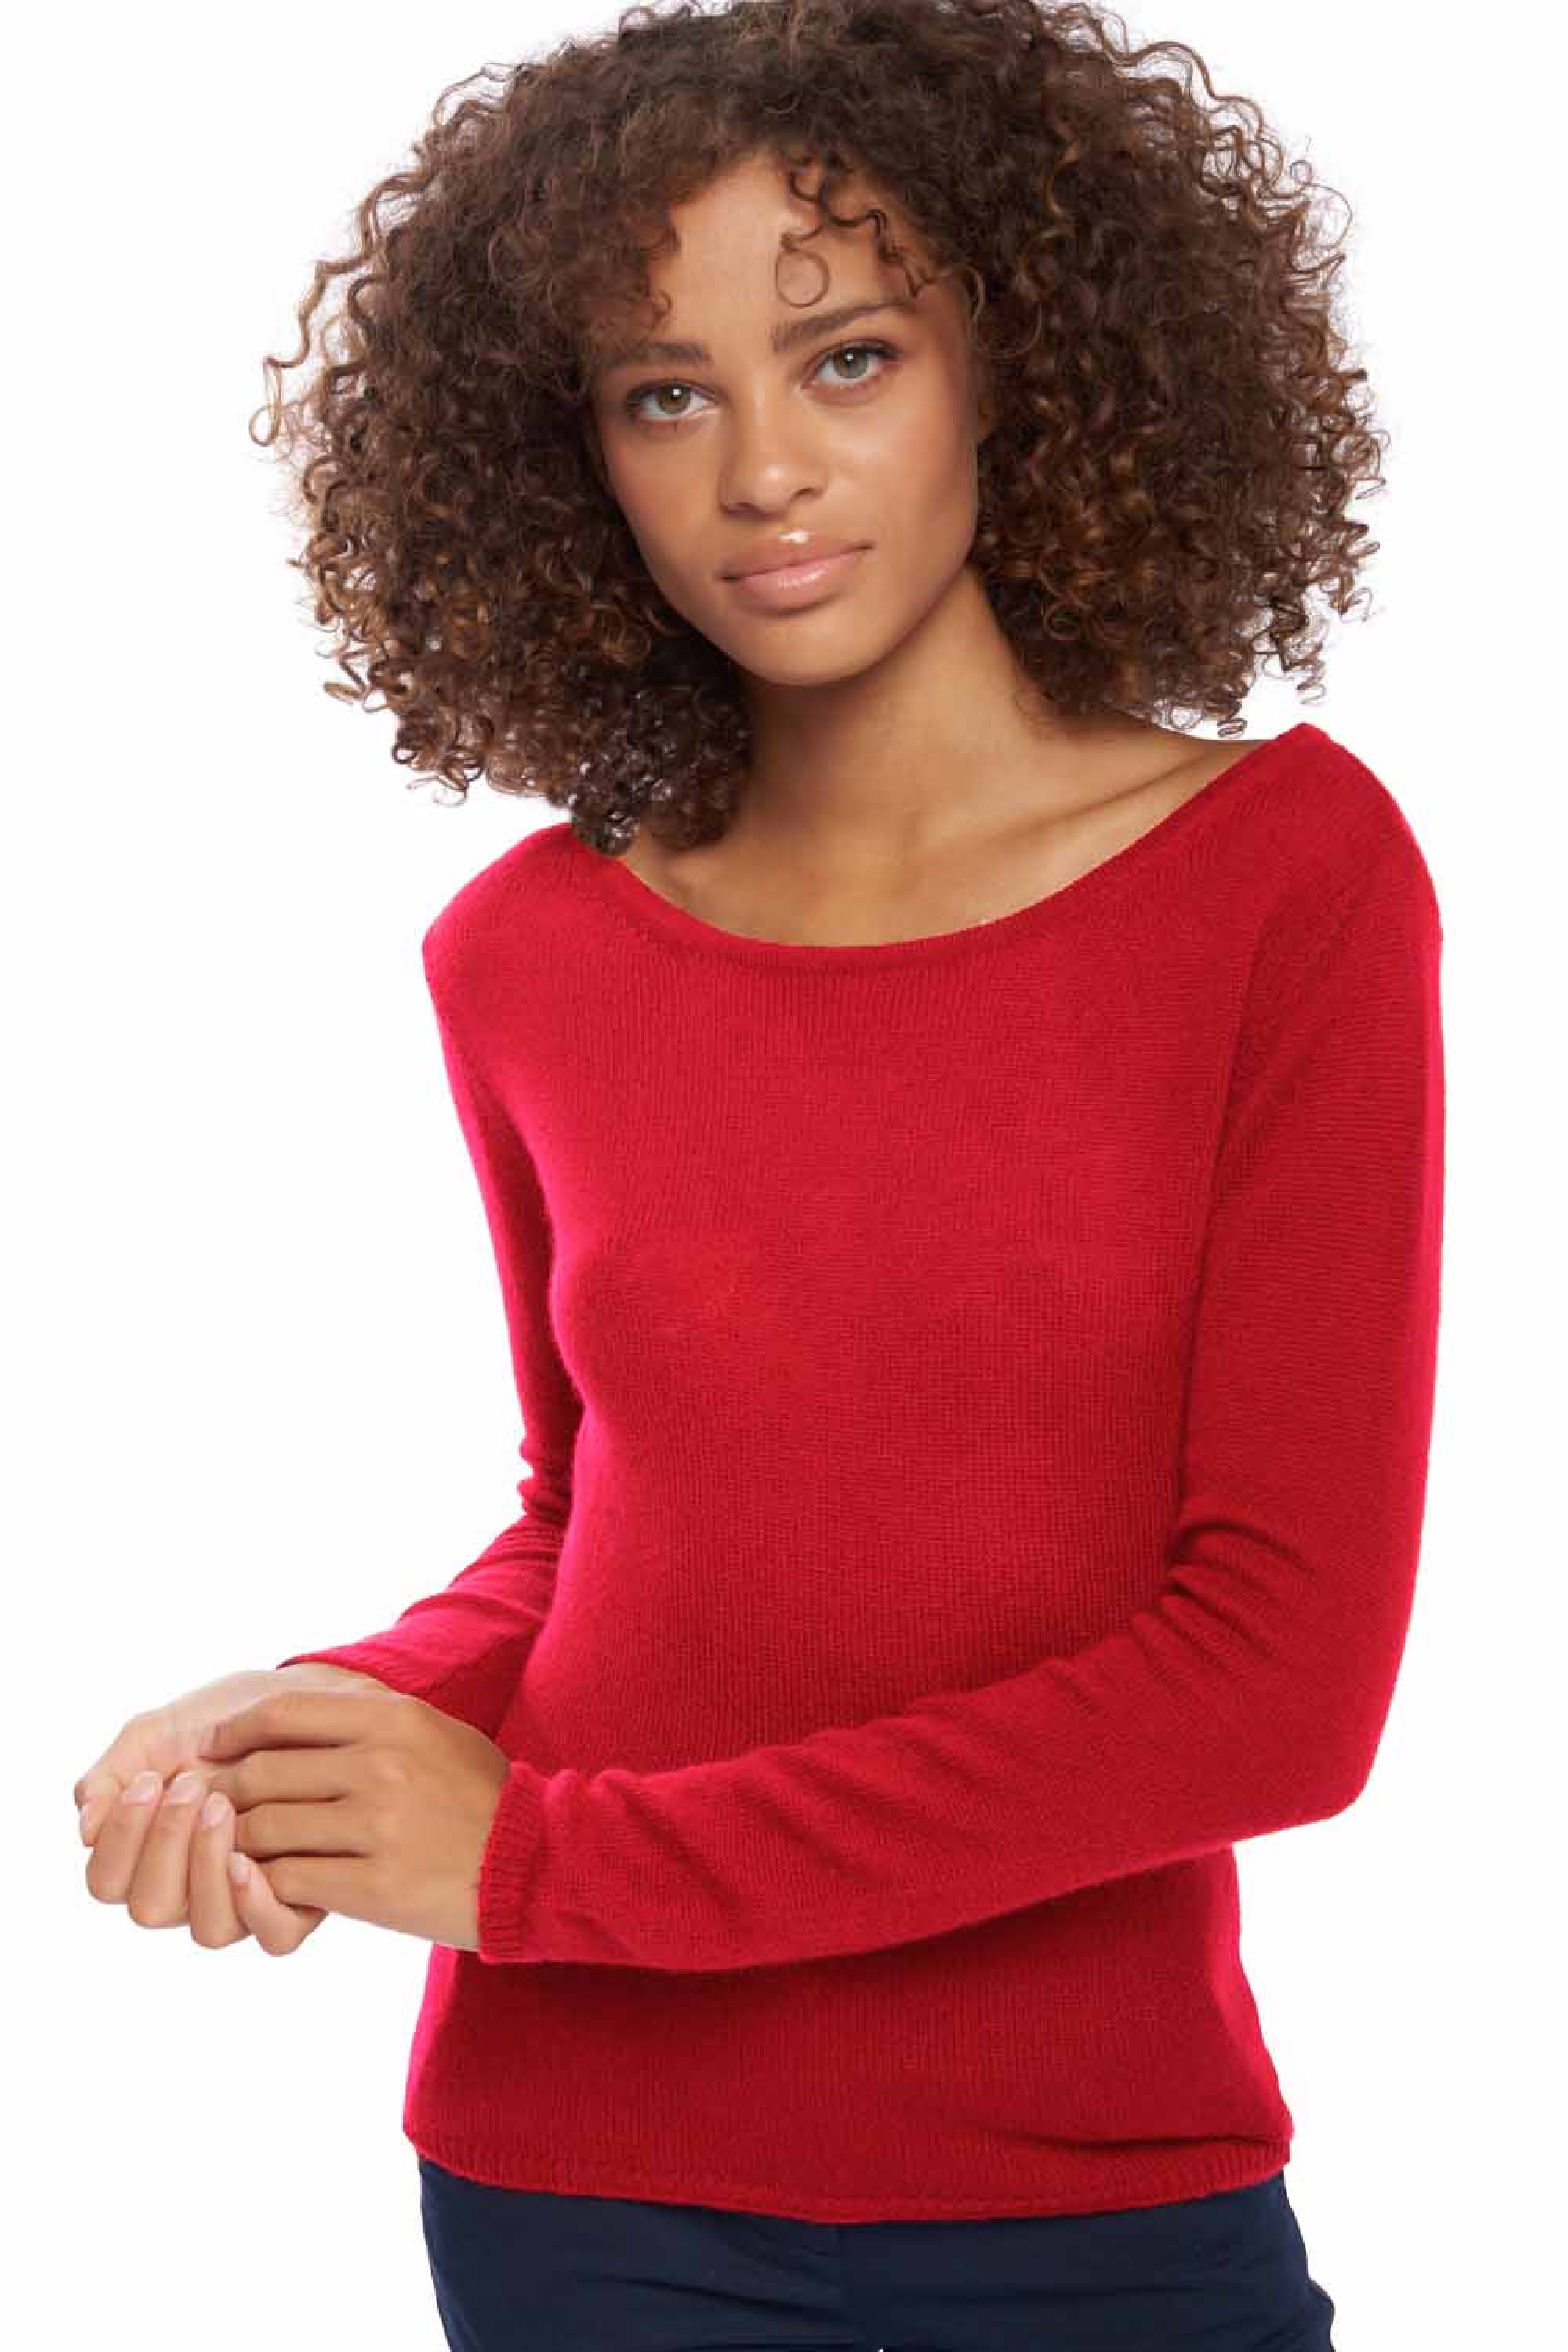 Cashmere ladies timeless classics caleen blood red 3xl